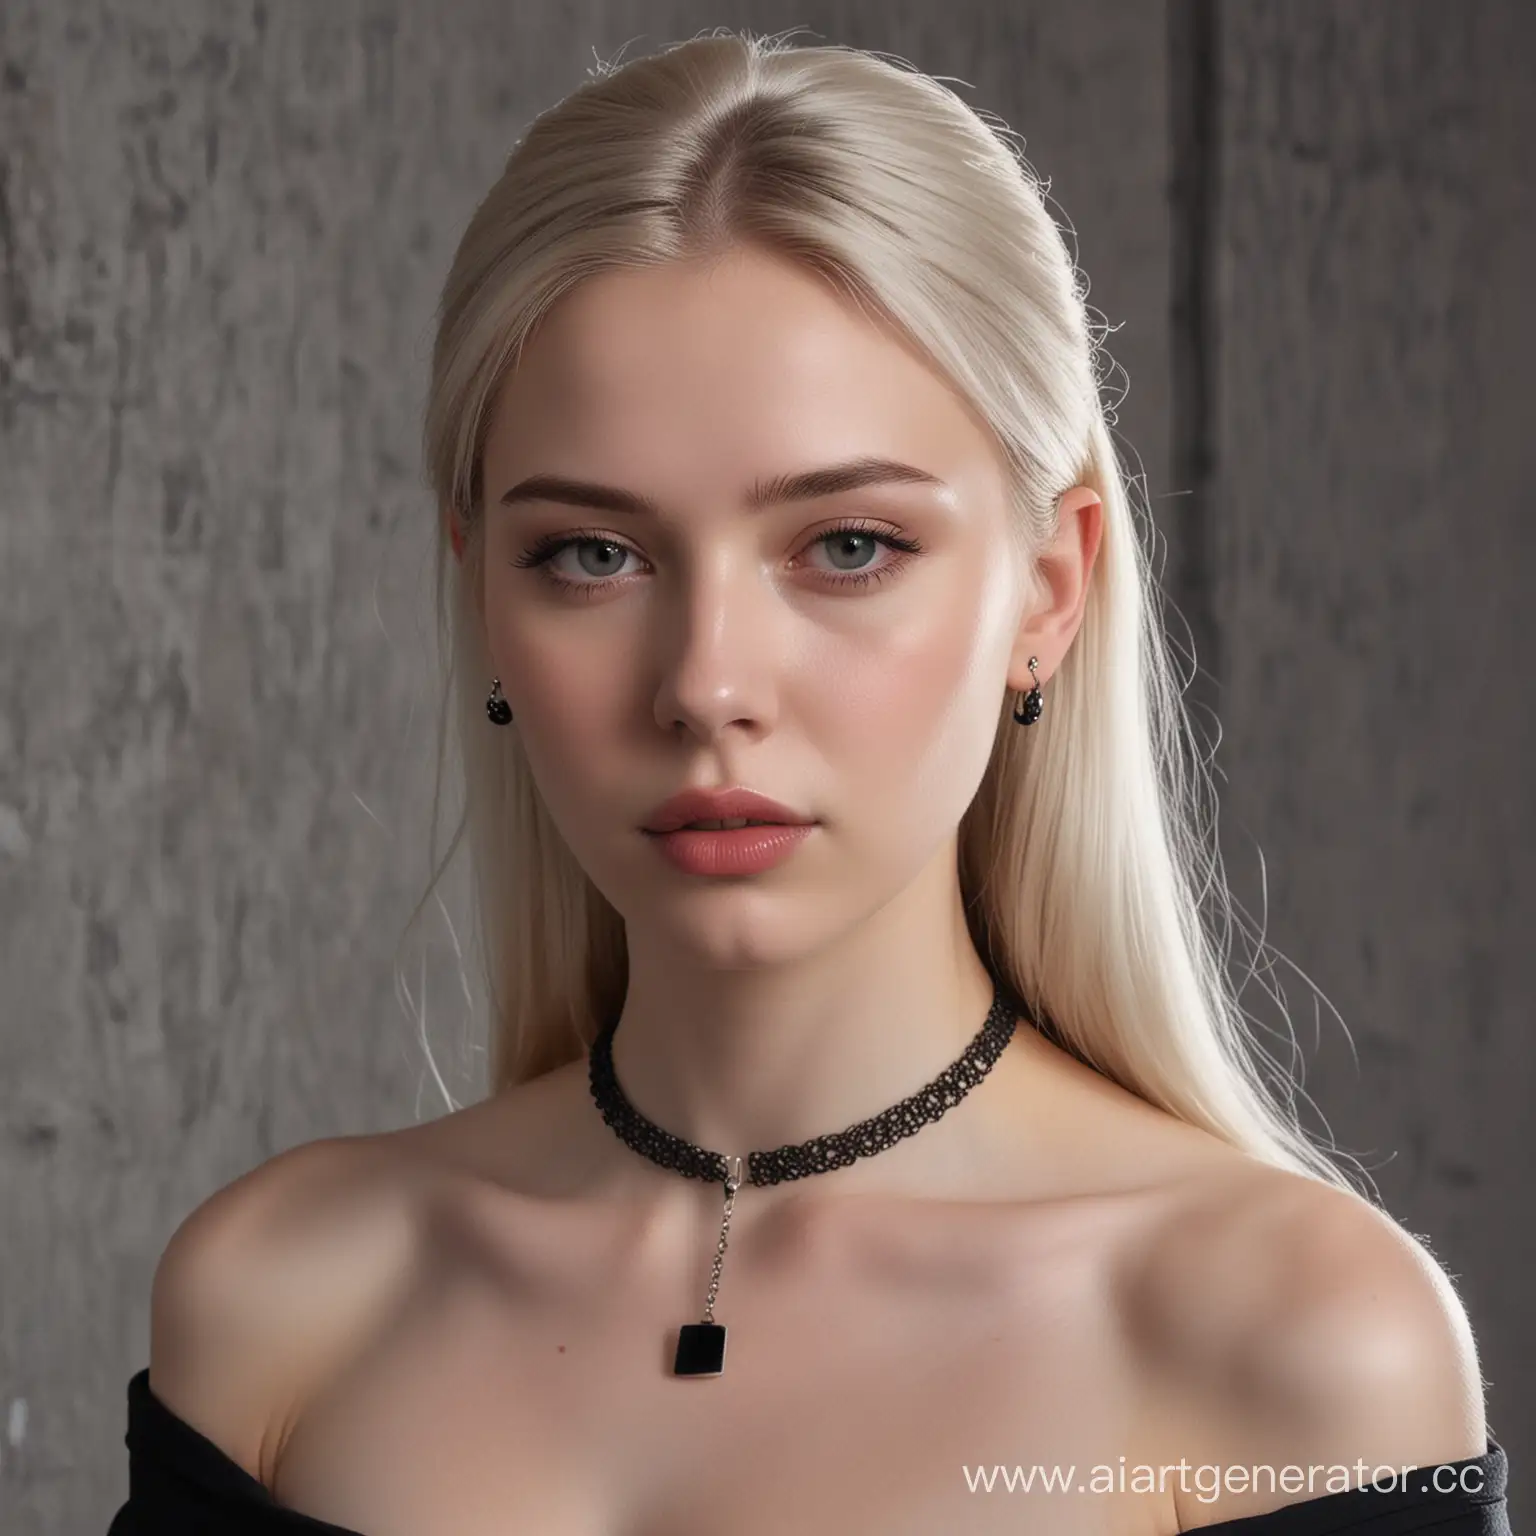 Portrait-of-a-Mysterious-Girl-with-Ashy-Hair-and-Pale-Skin-in-a-Black-Dress